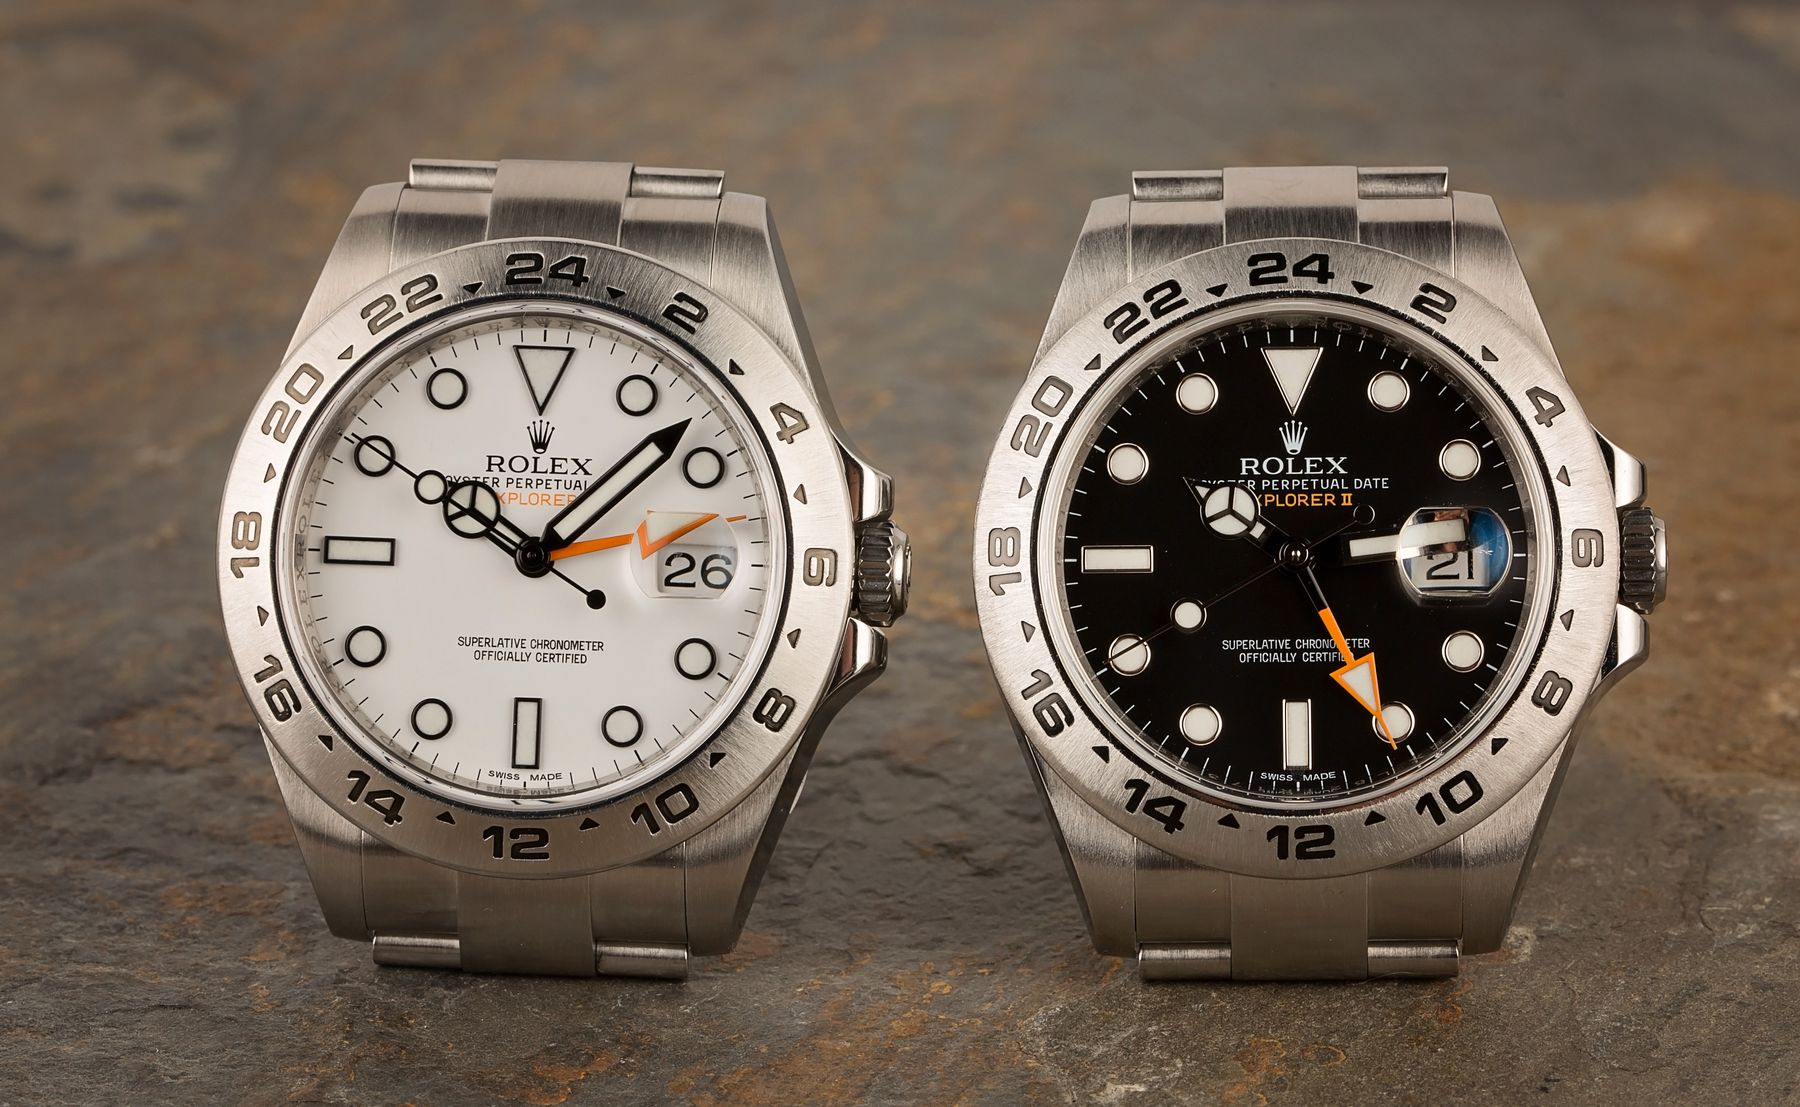 How to Use the Rolex Explorer II Like a GMT